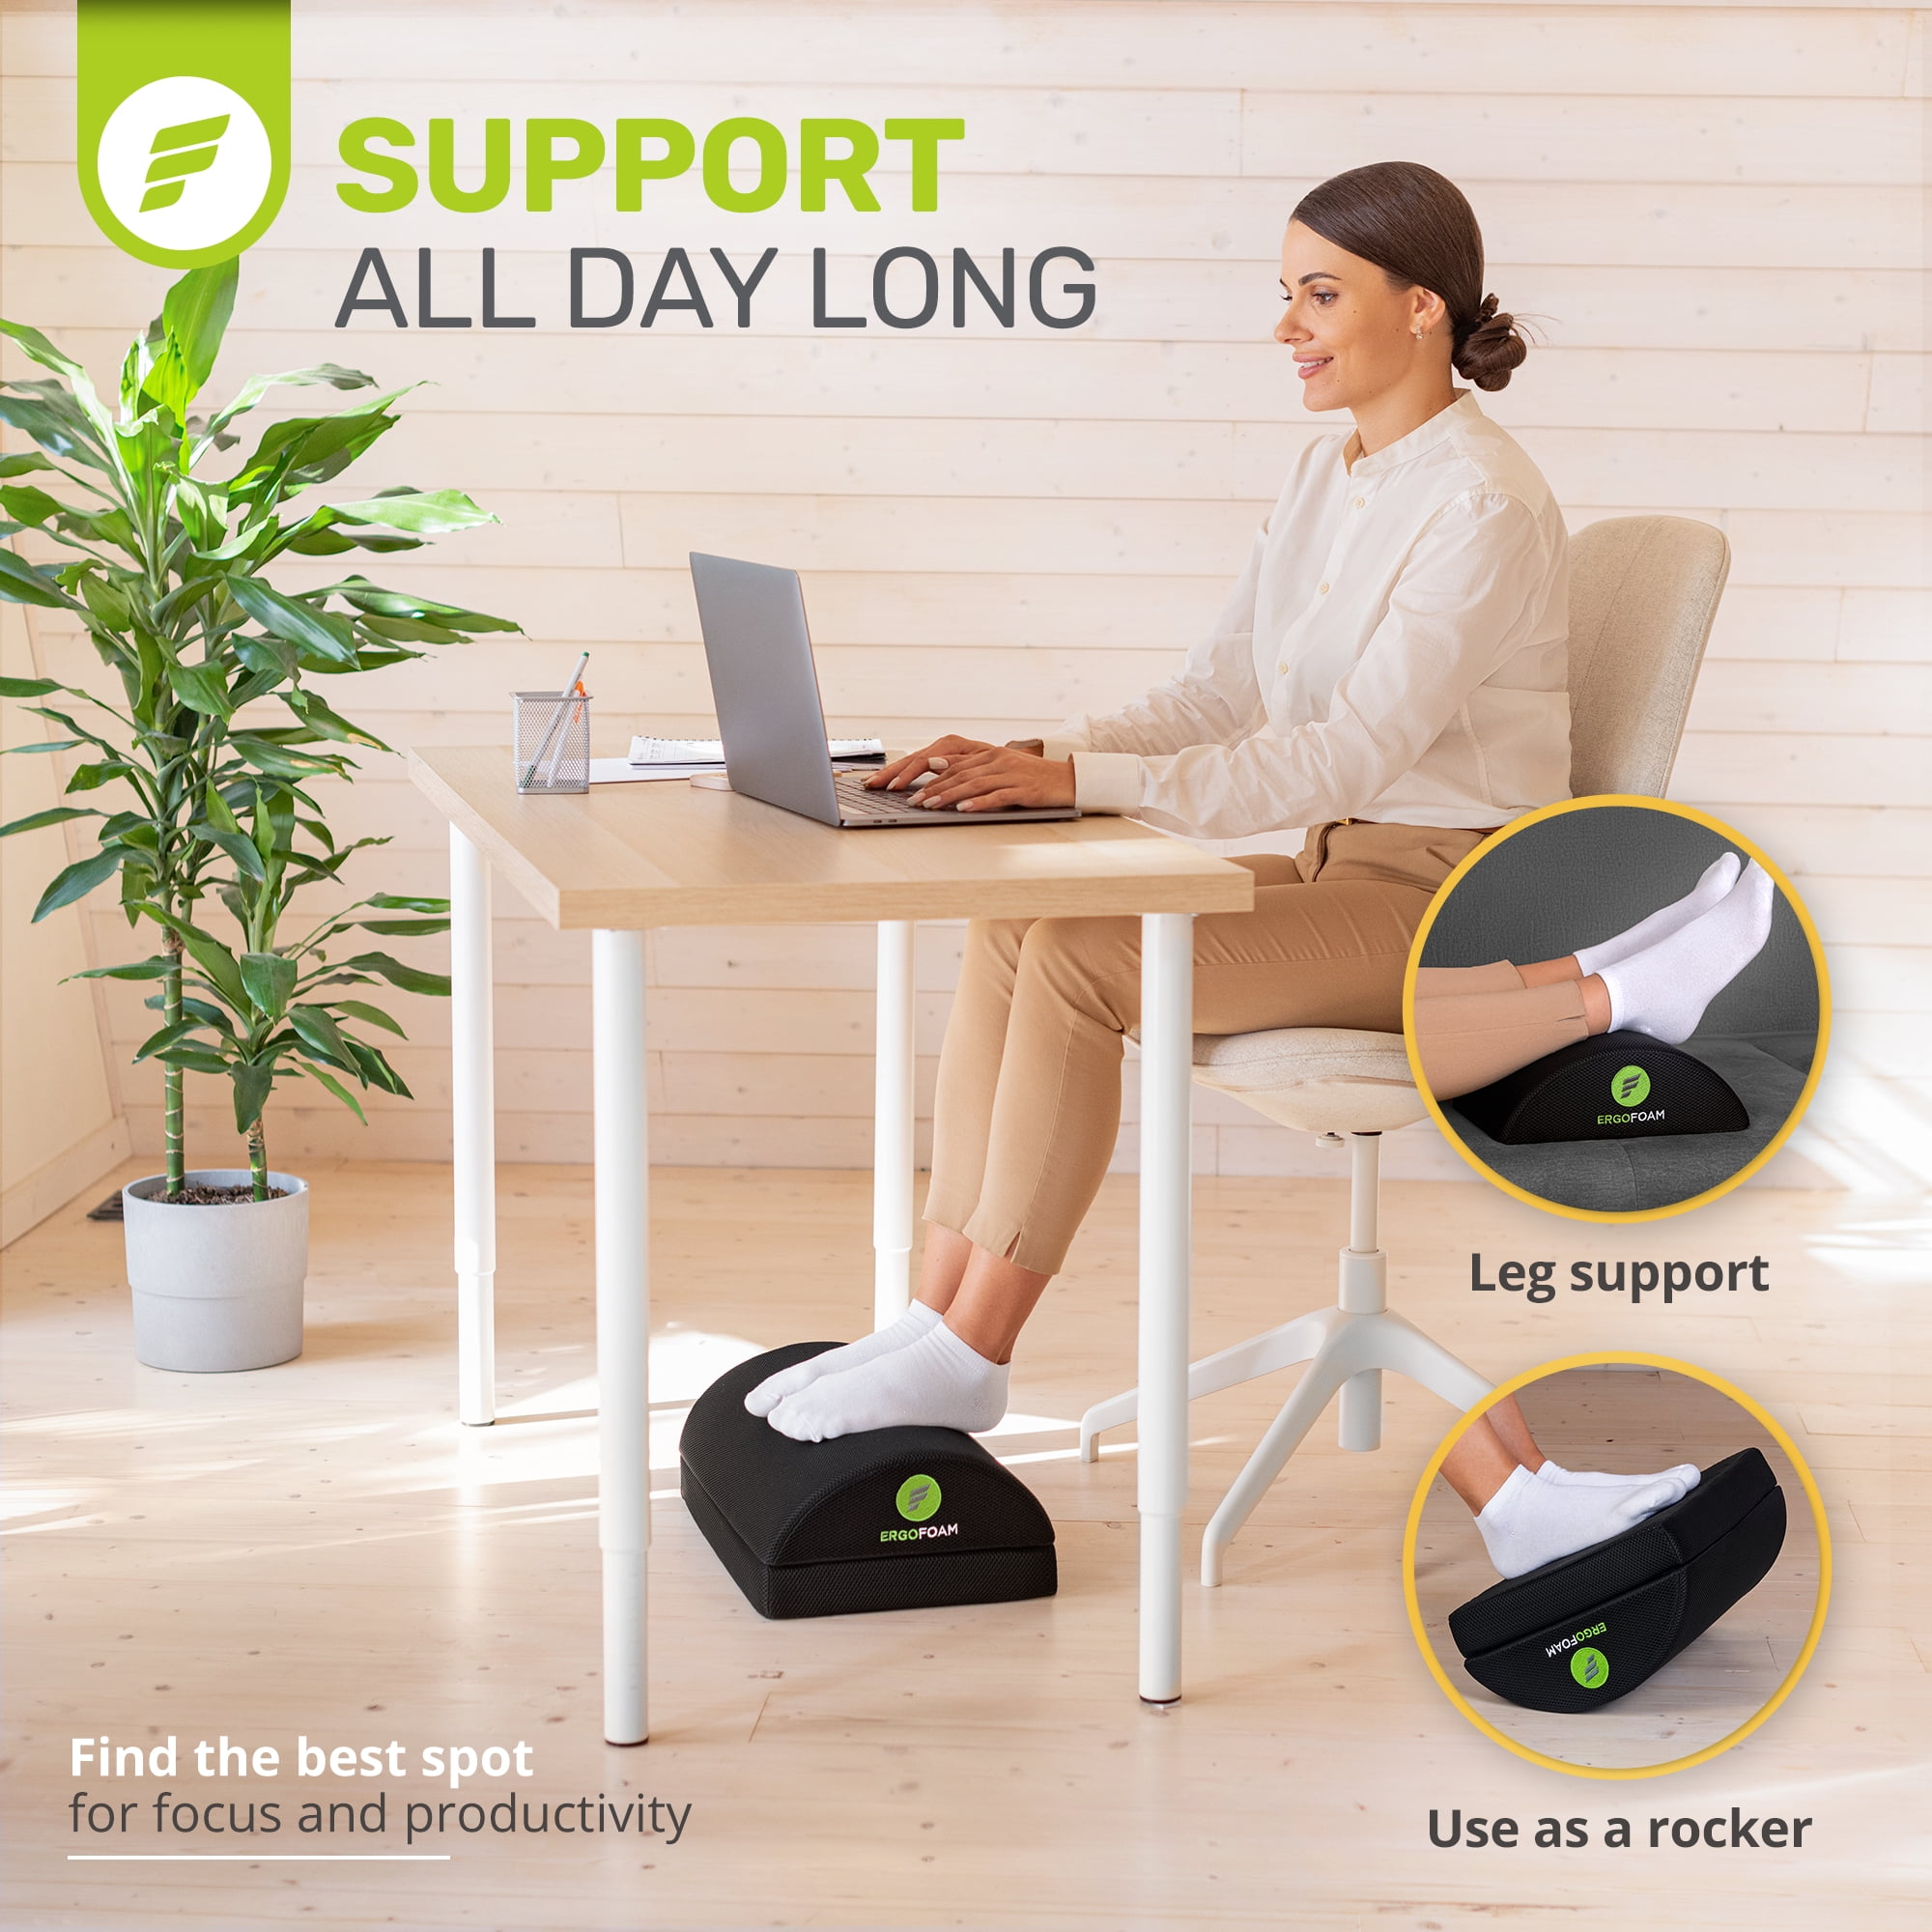 Cozy Ergo Adjustable Foot Rest – Ergonomic Under Desk Footrest with 2  Adjustable Height - Foam Foot Rest Under Desk for Leg Support and Knee Pain  Relief in Your Home Office and